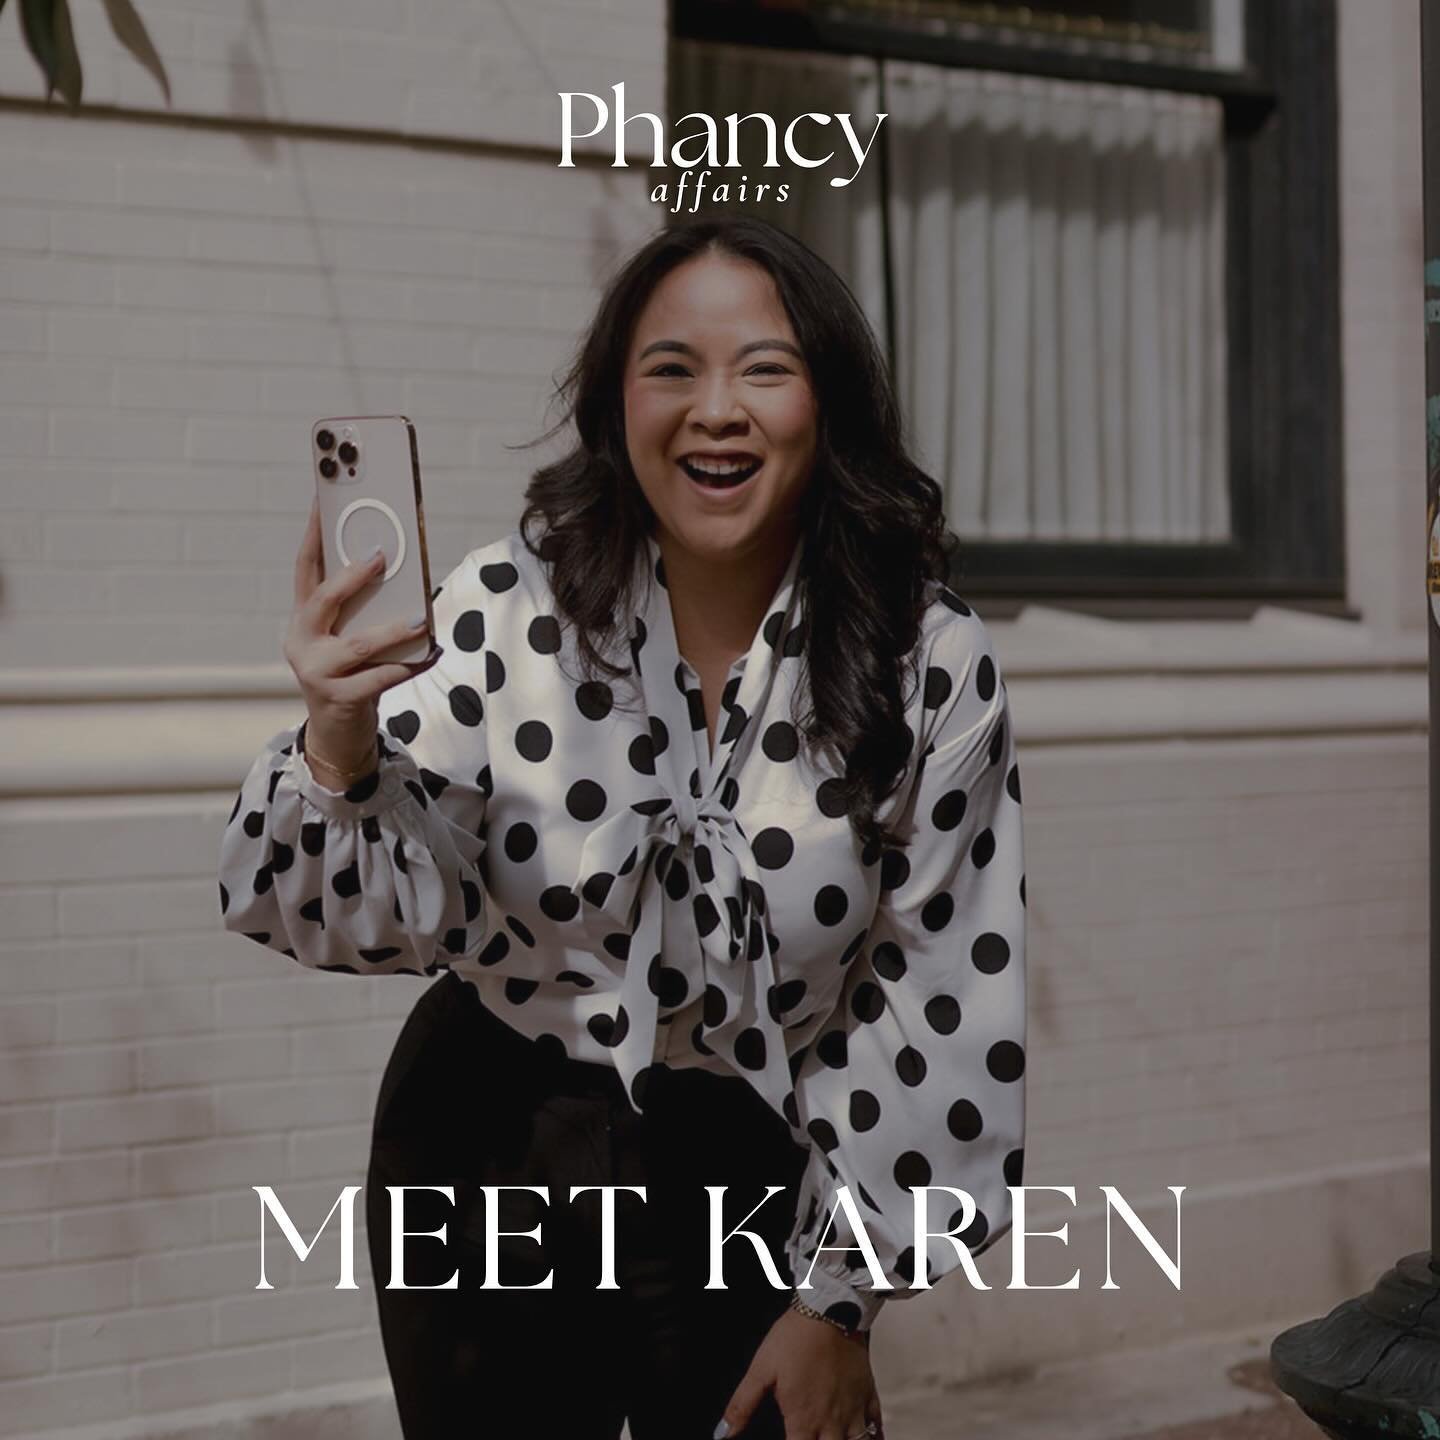 ✨ Introducing the visionary behind Phancy Affairs, Karen Phan! 

As the heart and soul of our creative journey, I will bring flair, finesse, and a touch of magic to every creation. Join me as we embark on a captivating adventure filled with style, in